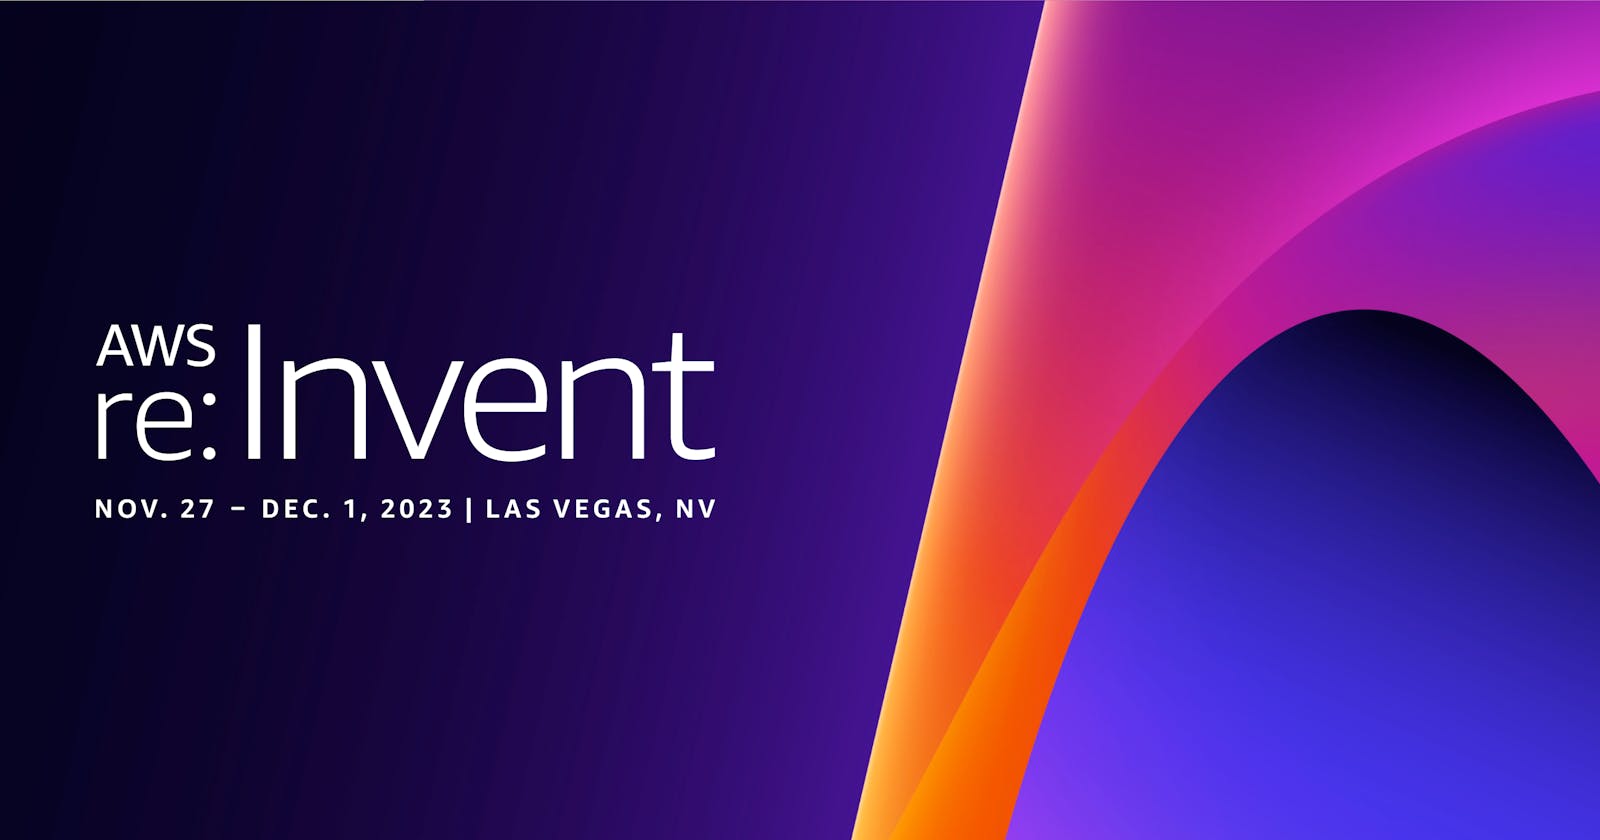 Navigating AWS re:Invent 2023 - Part 1: Laying the Groundwork for an Unforgettable Experience